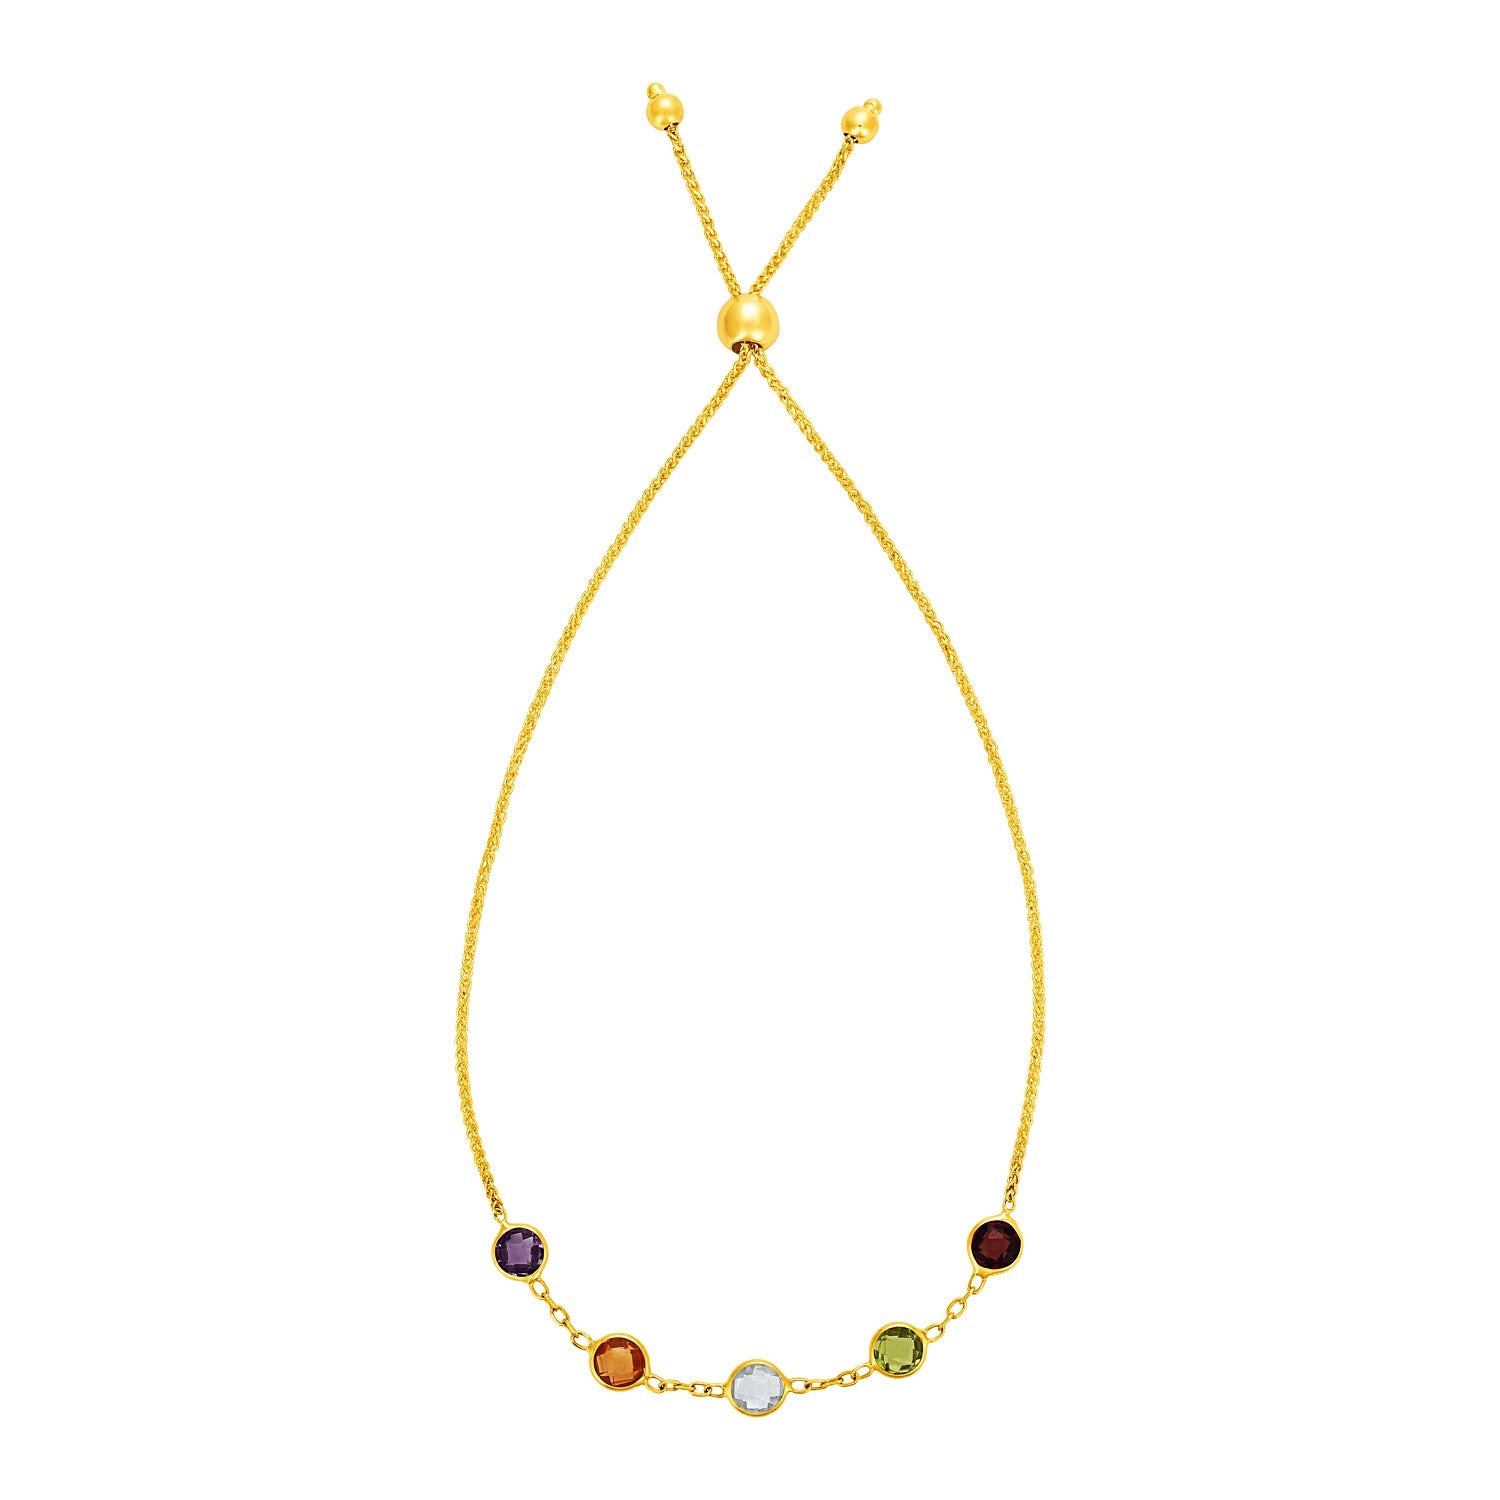 Adjustable Bracelet with Multicolored Small Round Gemstones in 14k Yellow Gold